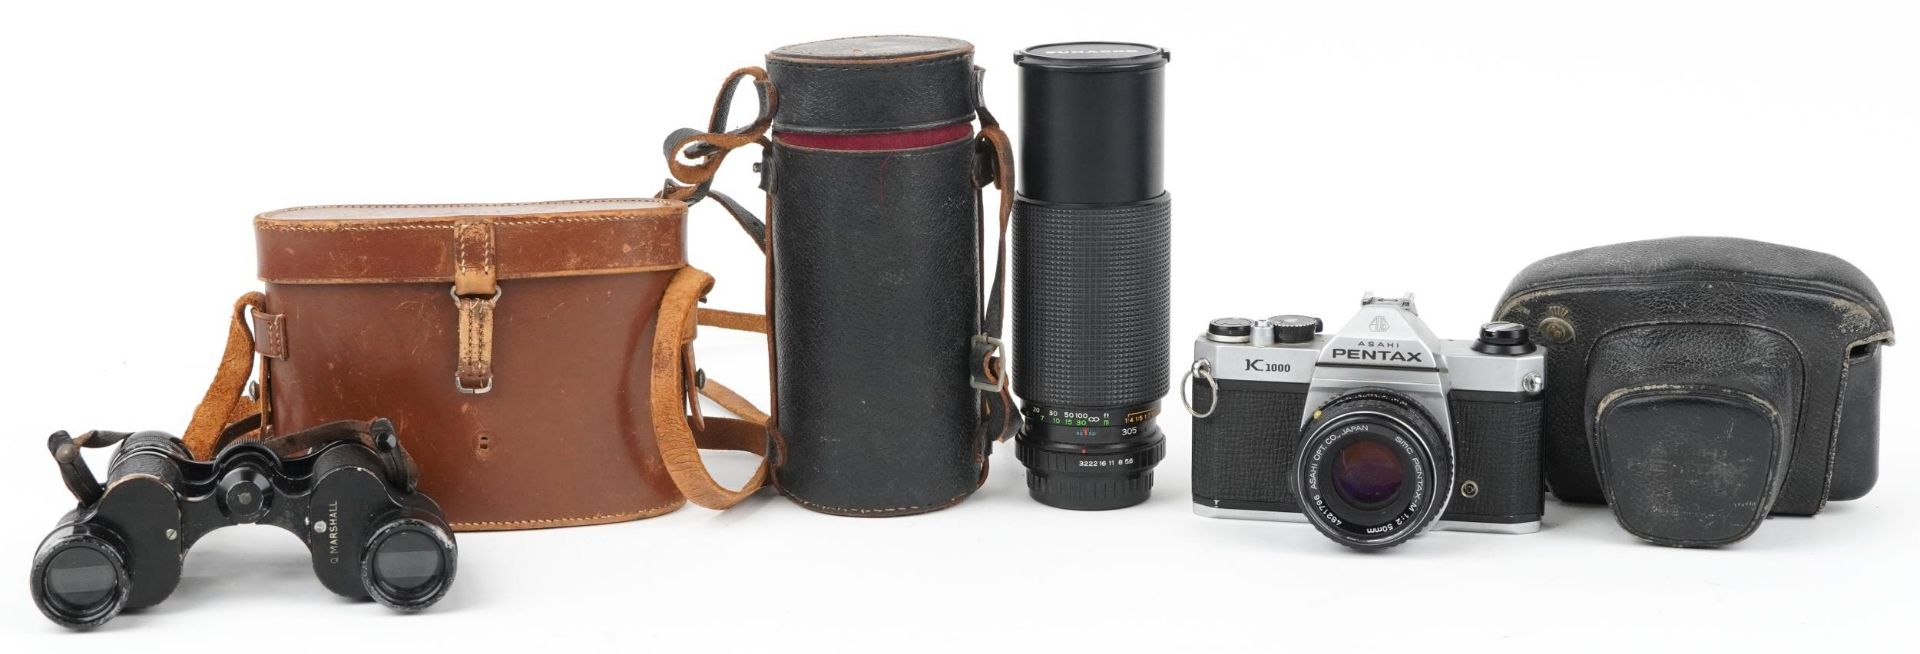 Cameras and binoculars with cases comprising Carl Zeiss Jena Sportur 6 x 24, Pentax Asahi K 1000 and